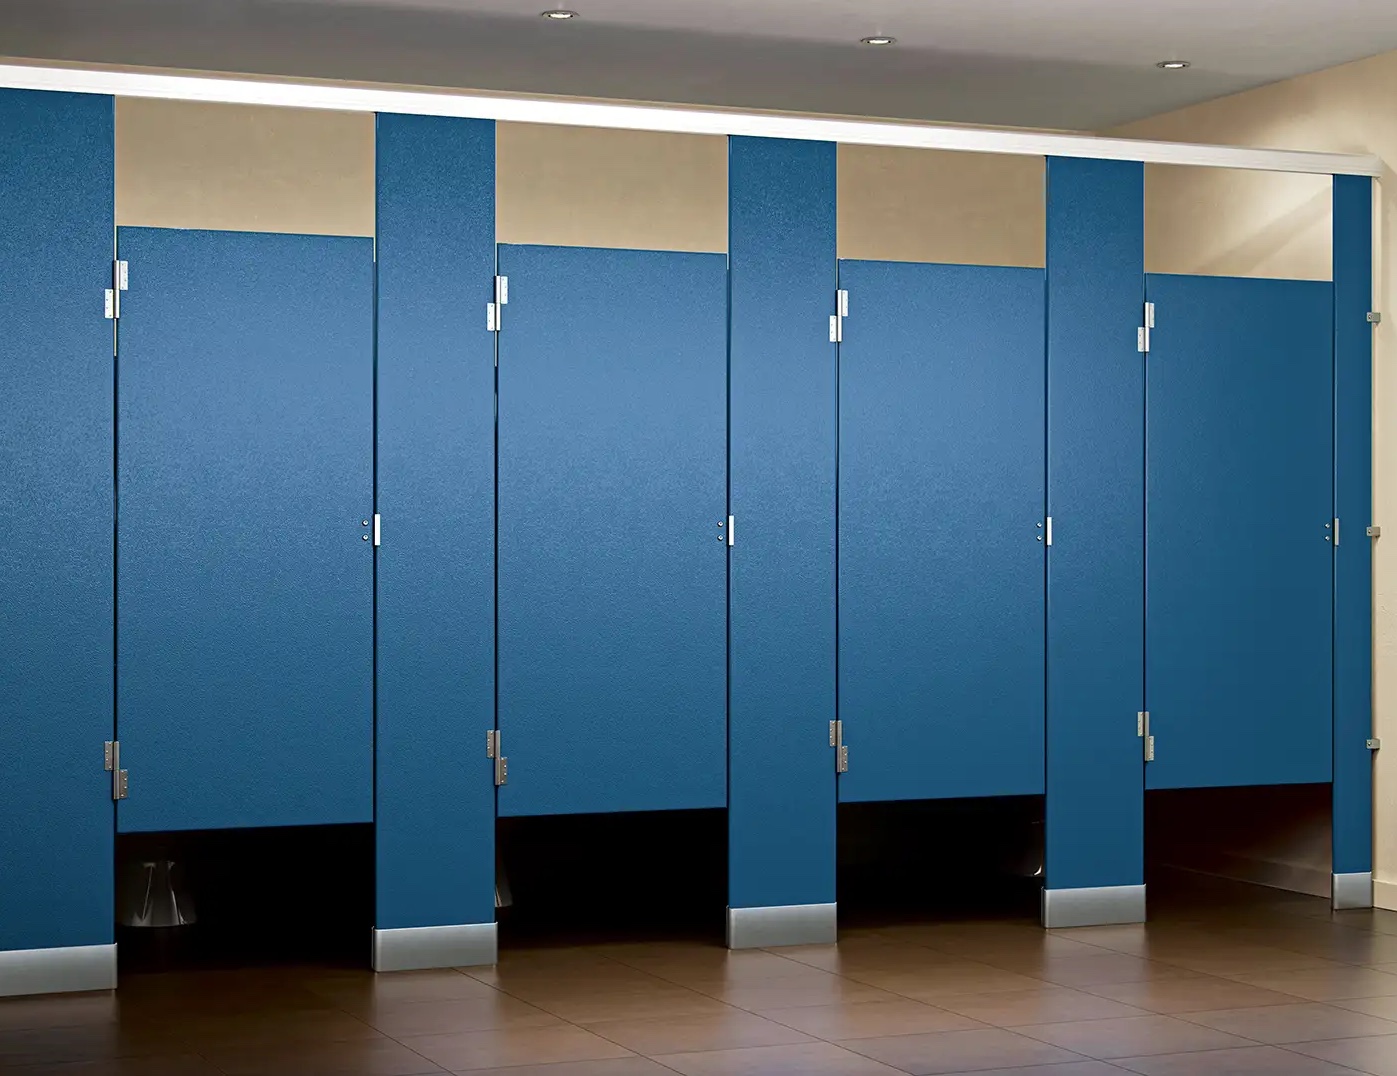 most disgusting workplace stories - plastic toilet partitions - 1